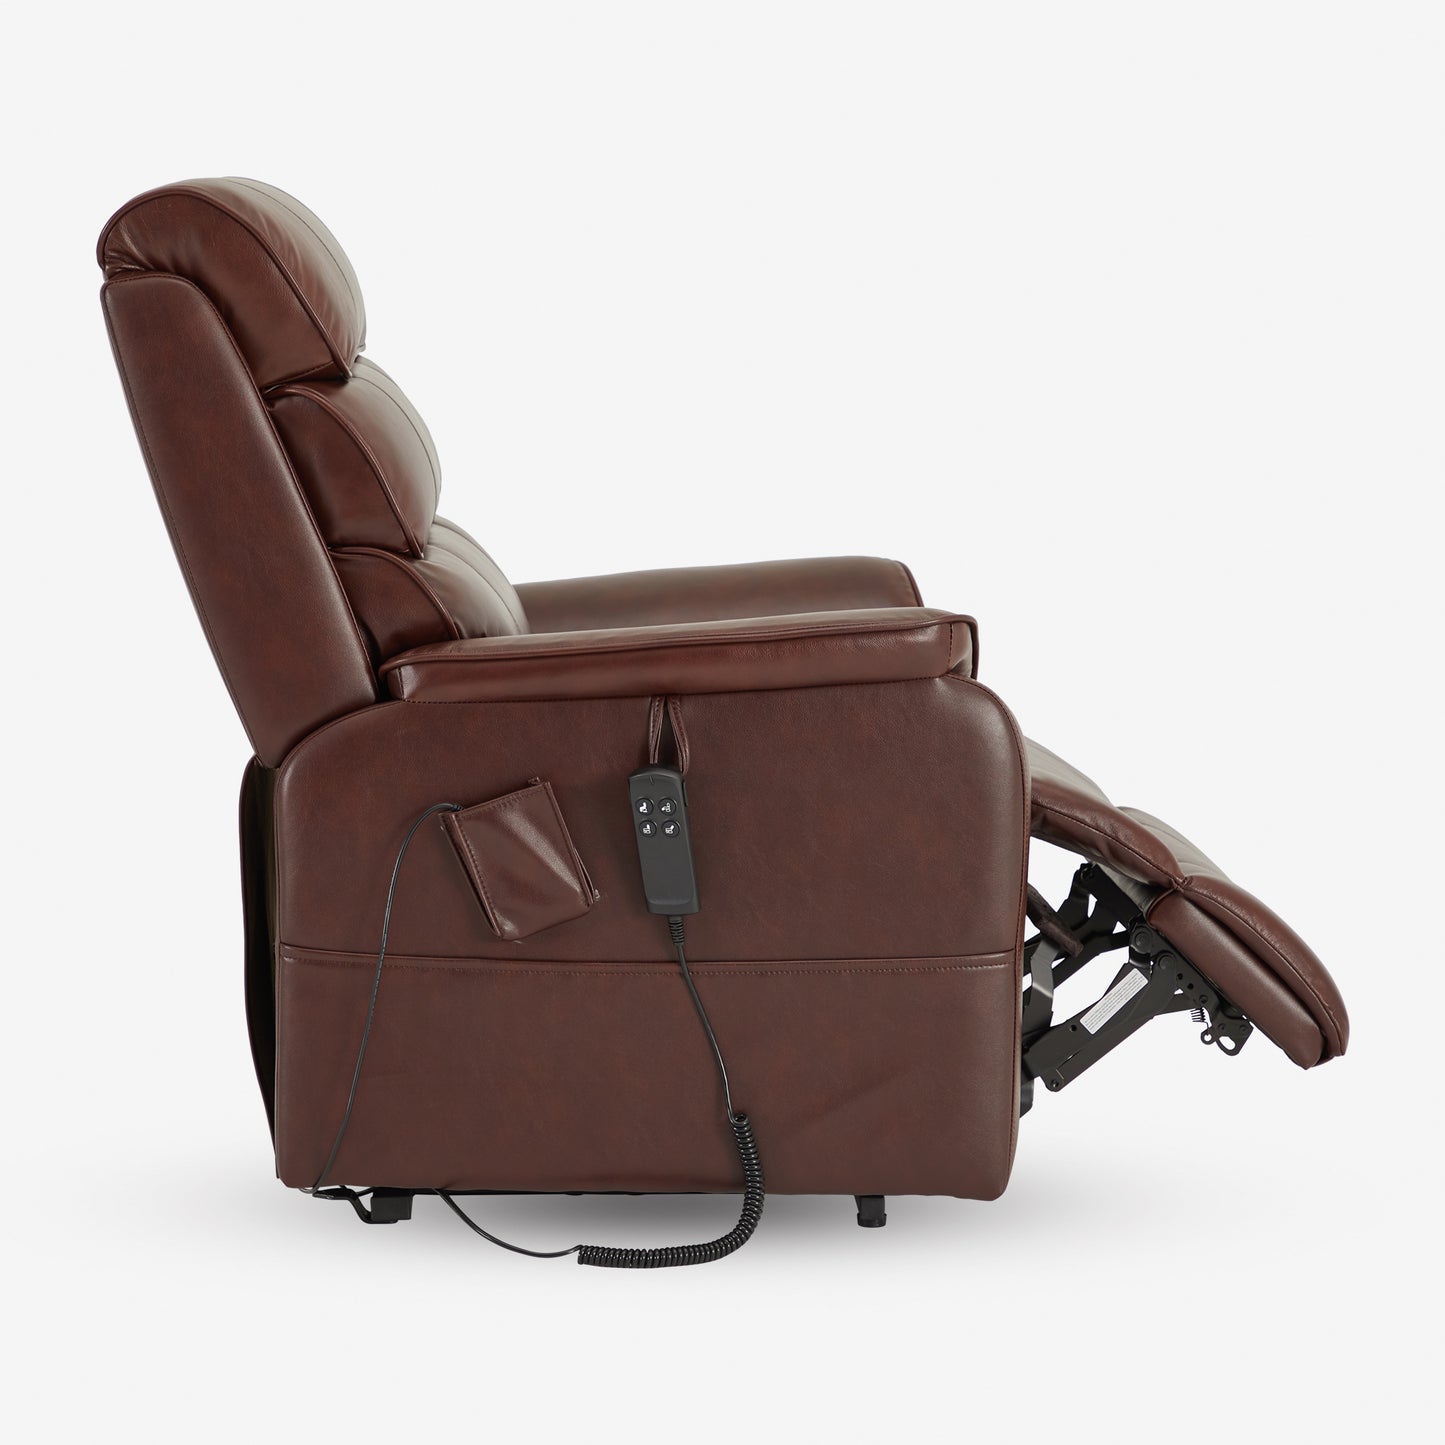 Brown Real Leather Recliner With Full Lay Flat Heating & Massage